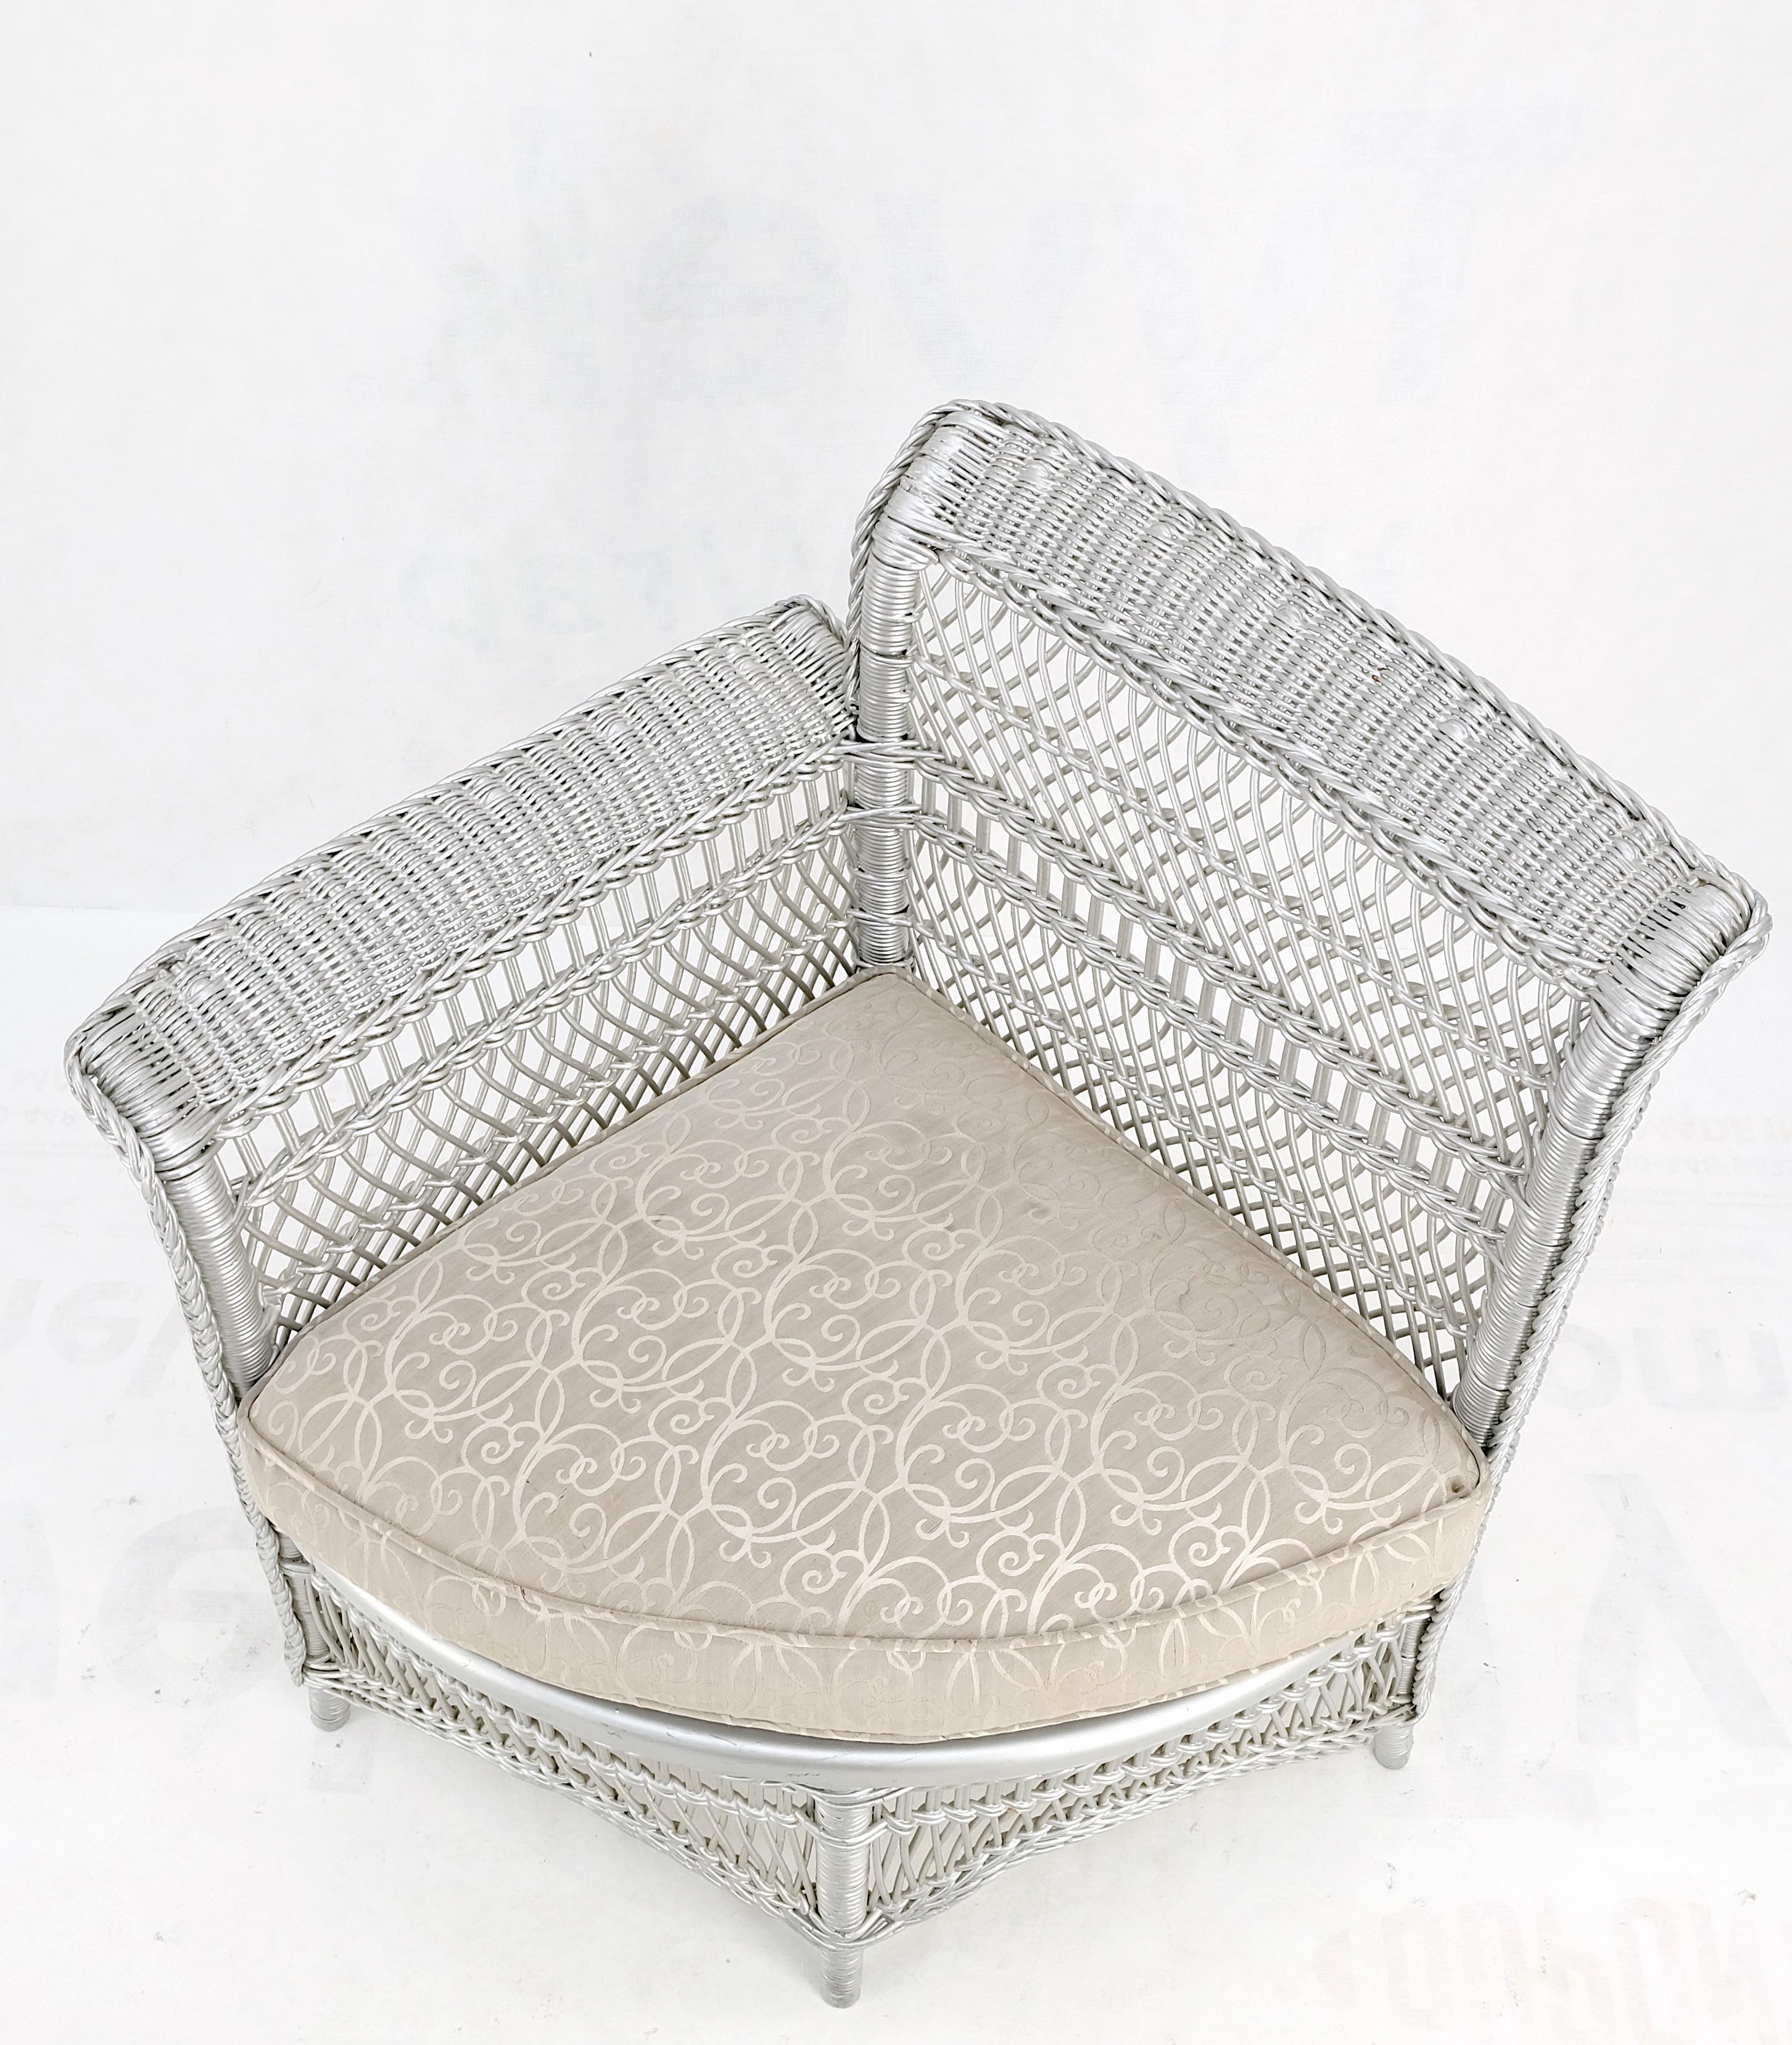 Antique wicker corner chair finished painted in silver metal finish mint.